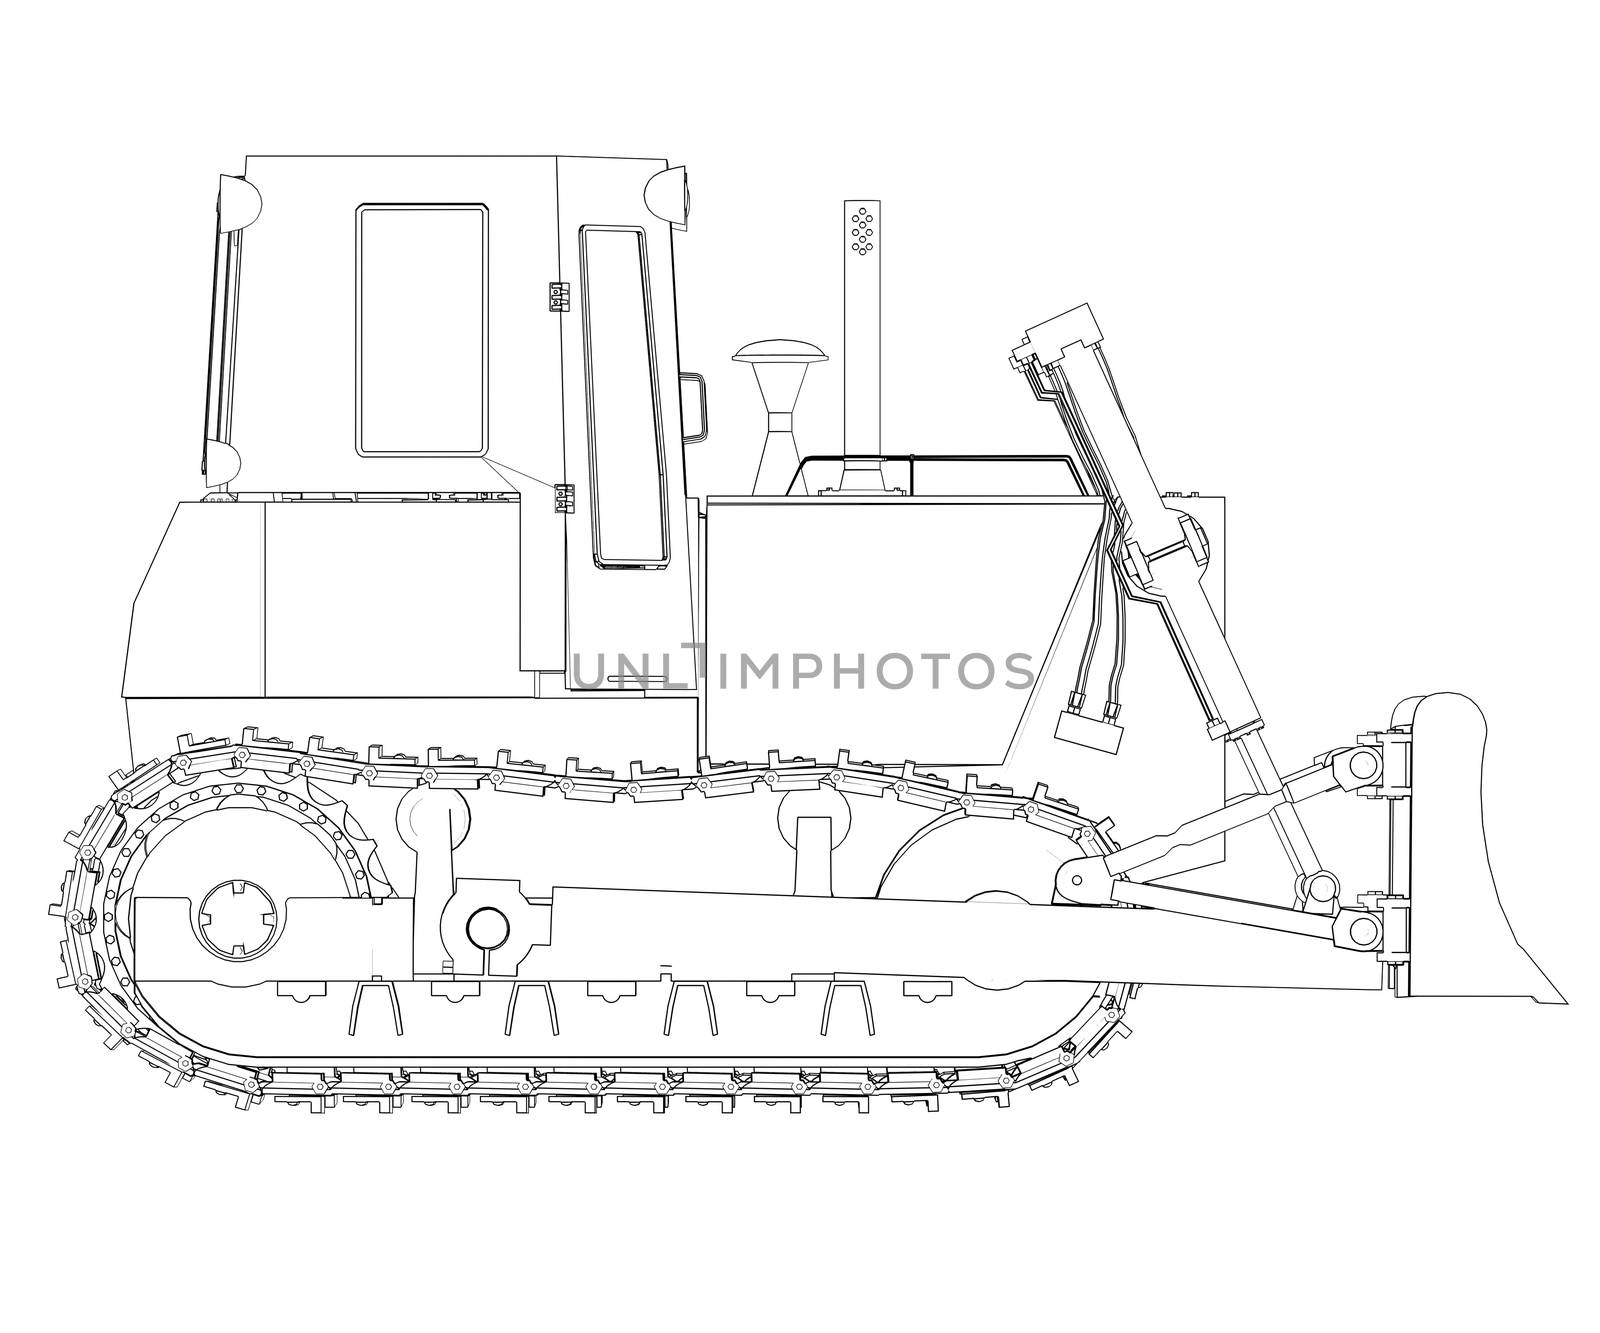 Tractor rendering in lines by cherezoff